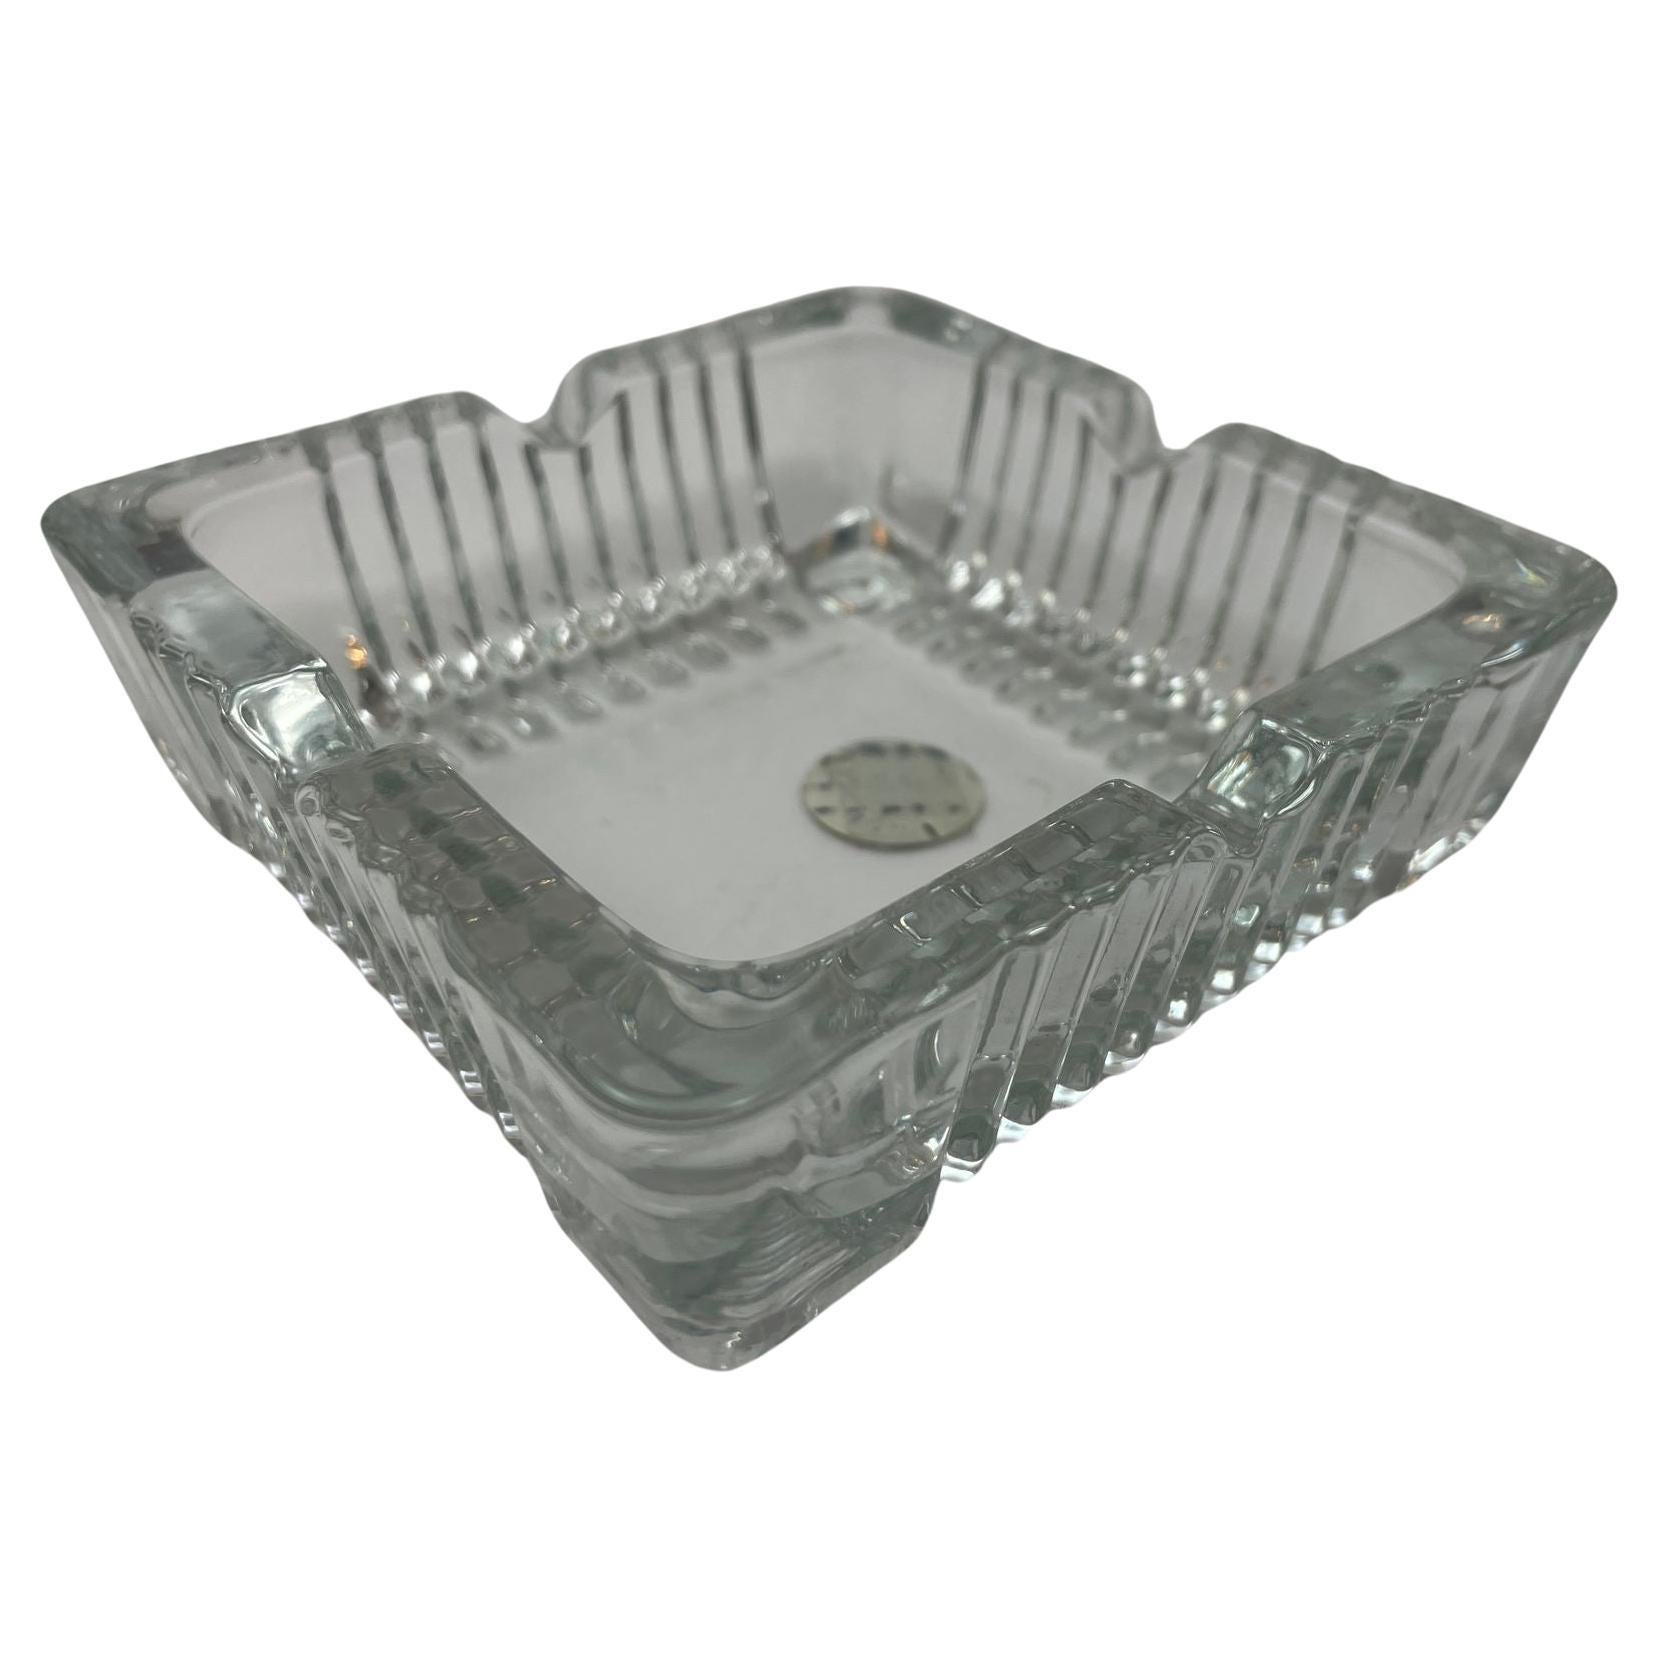 Cristal D'Arques Crystal Ashtray Trinket Dish France Cut Glass Square Catchall For Sale